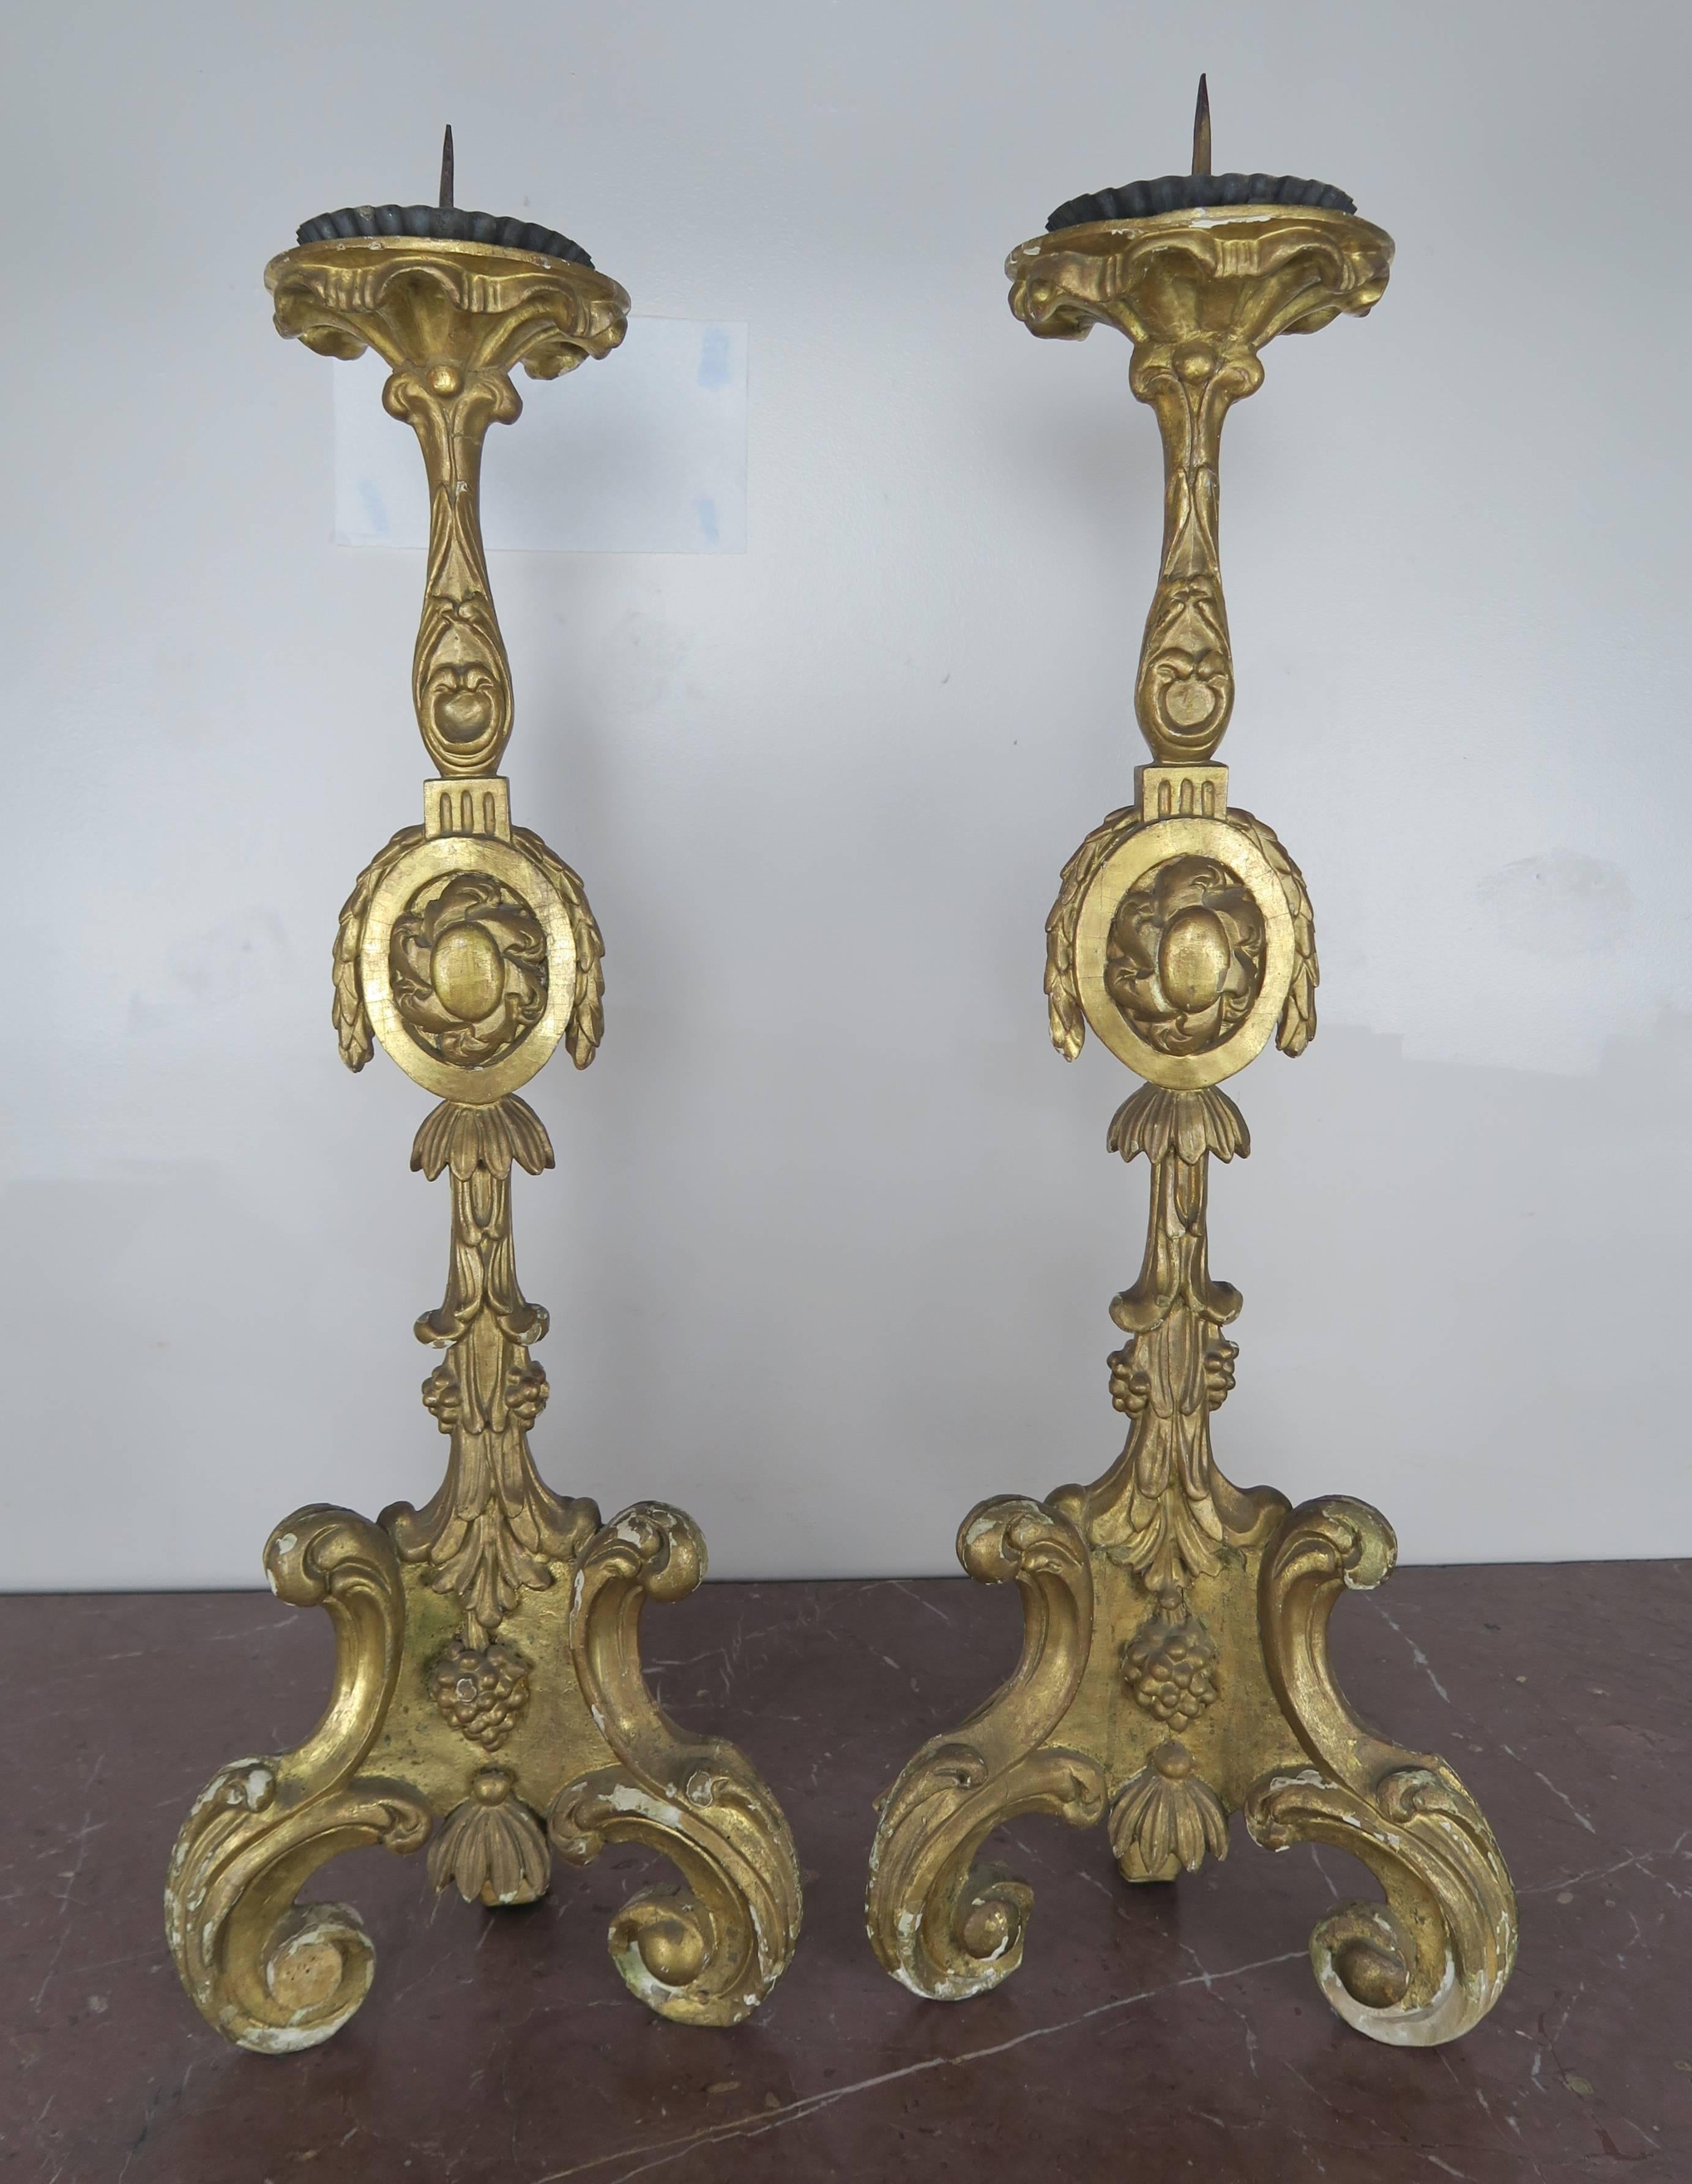 19th century Italian Baroque style giltwood altersticks with iron prickets and bobeches.